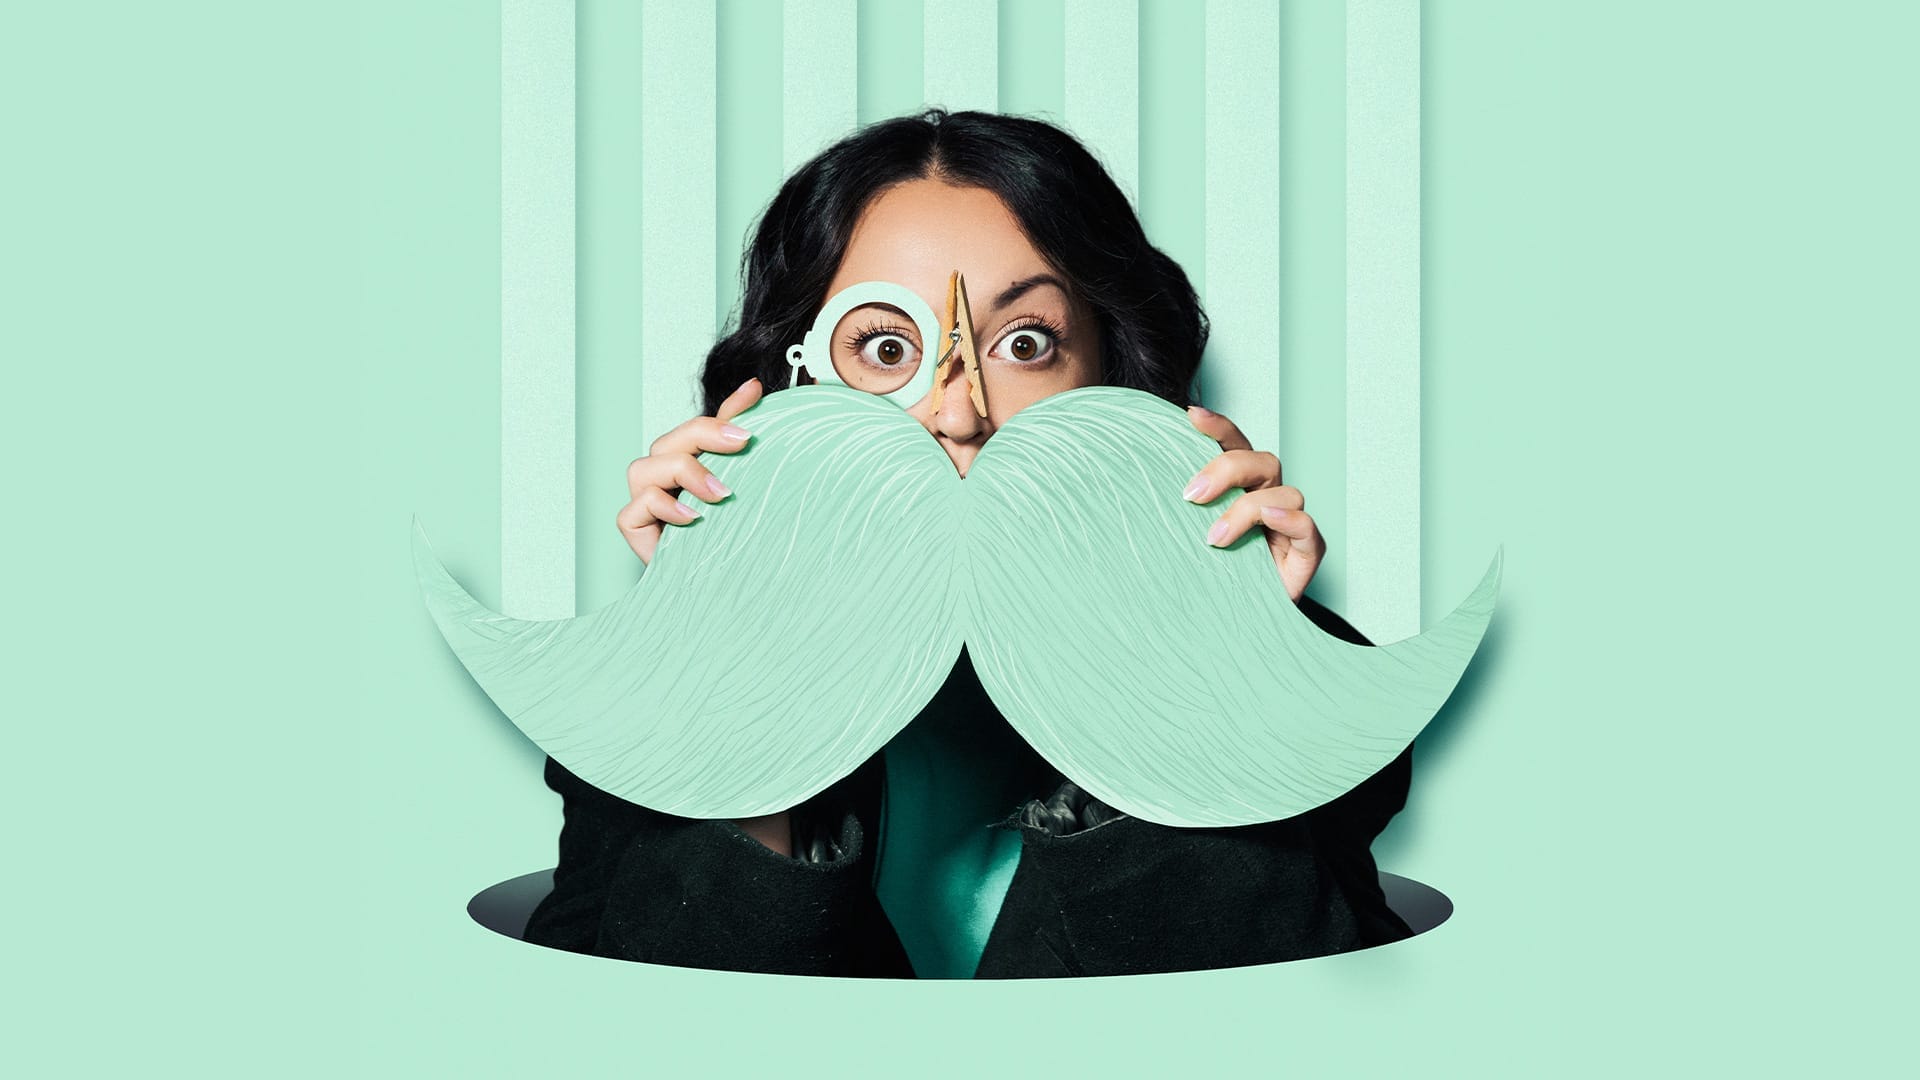 A vibrant mint green background. A woman with dark hair is holding up a large mint green cut-out moustache and monocle. Her nose is clipped with a wooden peg.